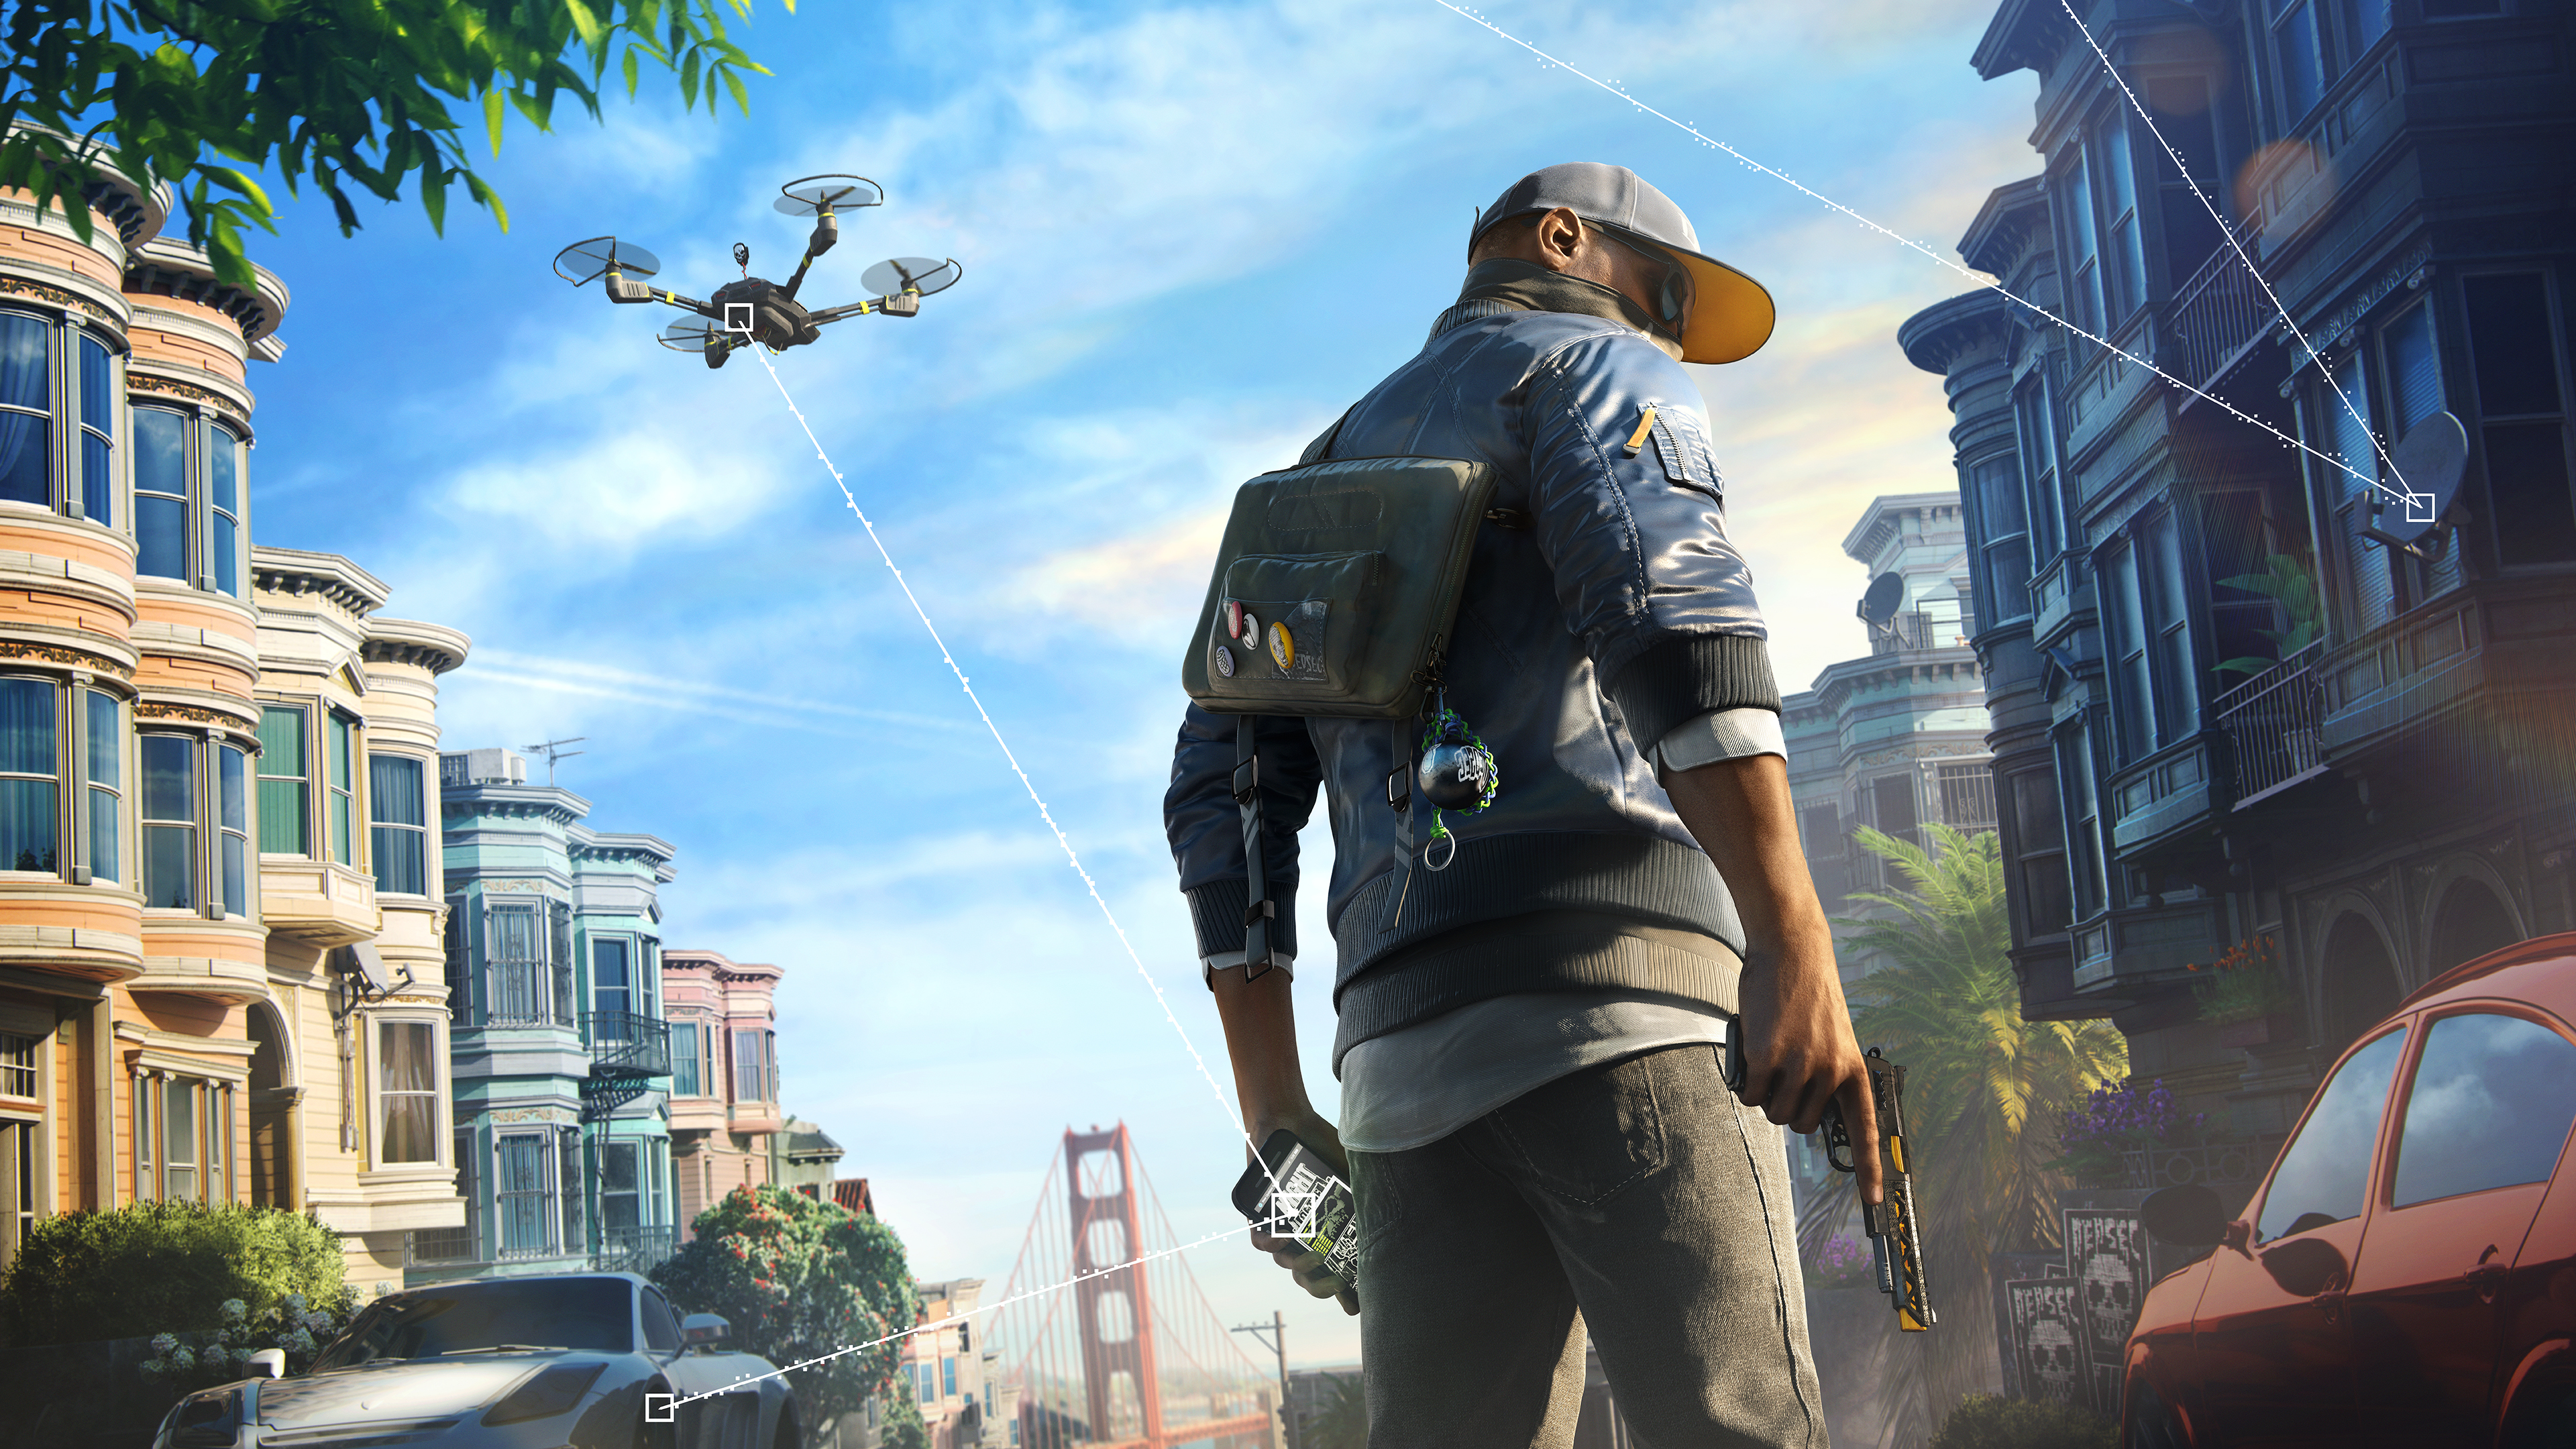 watch dogs, watch dogs 2, video game, marcus holloway